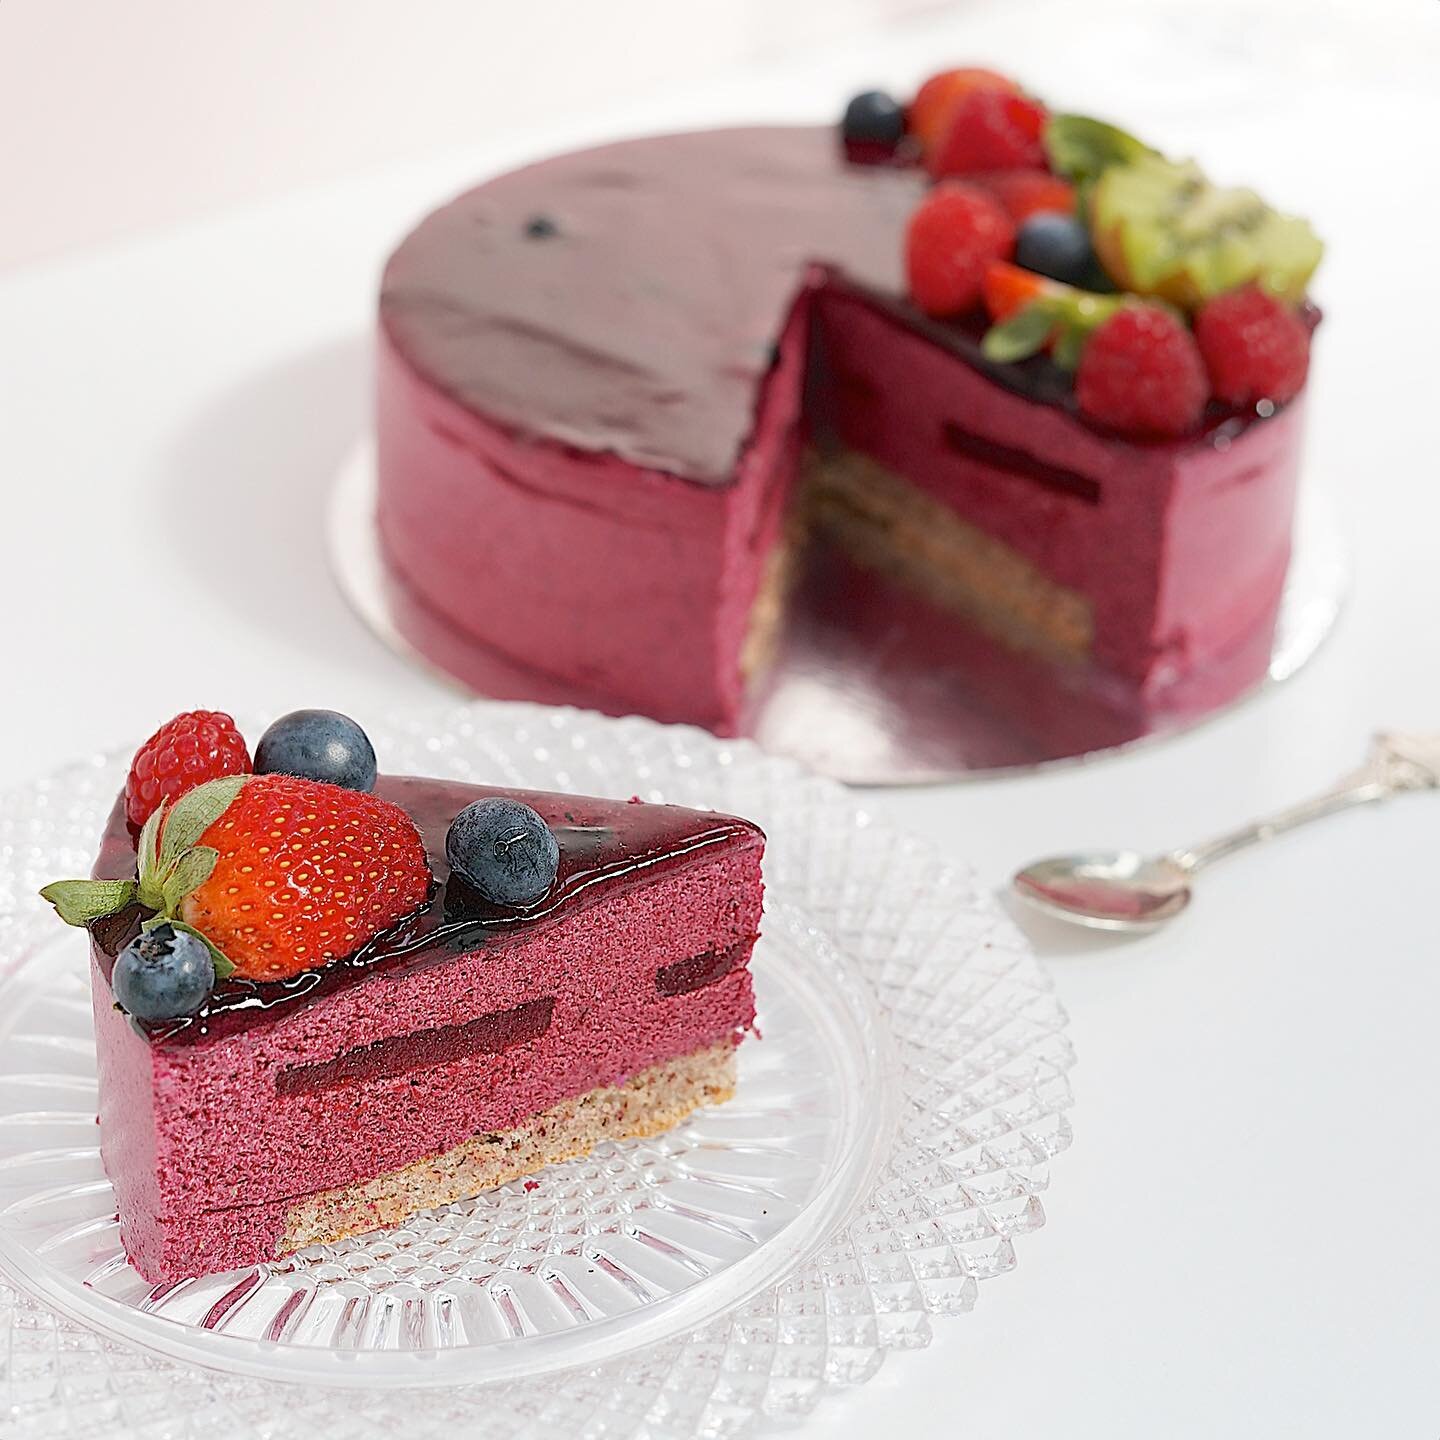 RASPBERRY CASSIS
A layered cake of hazelnut dacquoise, cassis (blackcurrant) mousse and raspberry jelly topped with a light raspberry glaze and fresh fruit.
.
.
#cassis #chocolat #chocolatofmornington #mornington #morningtonpeninsula #cakes #french #